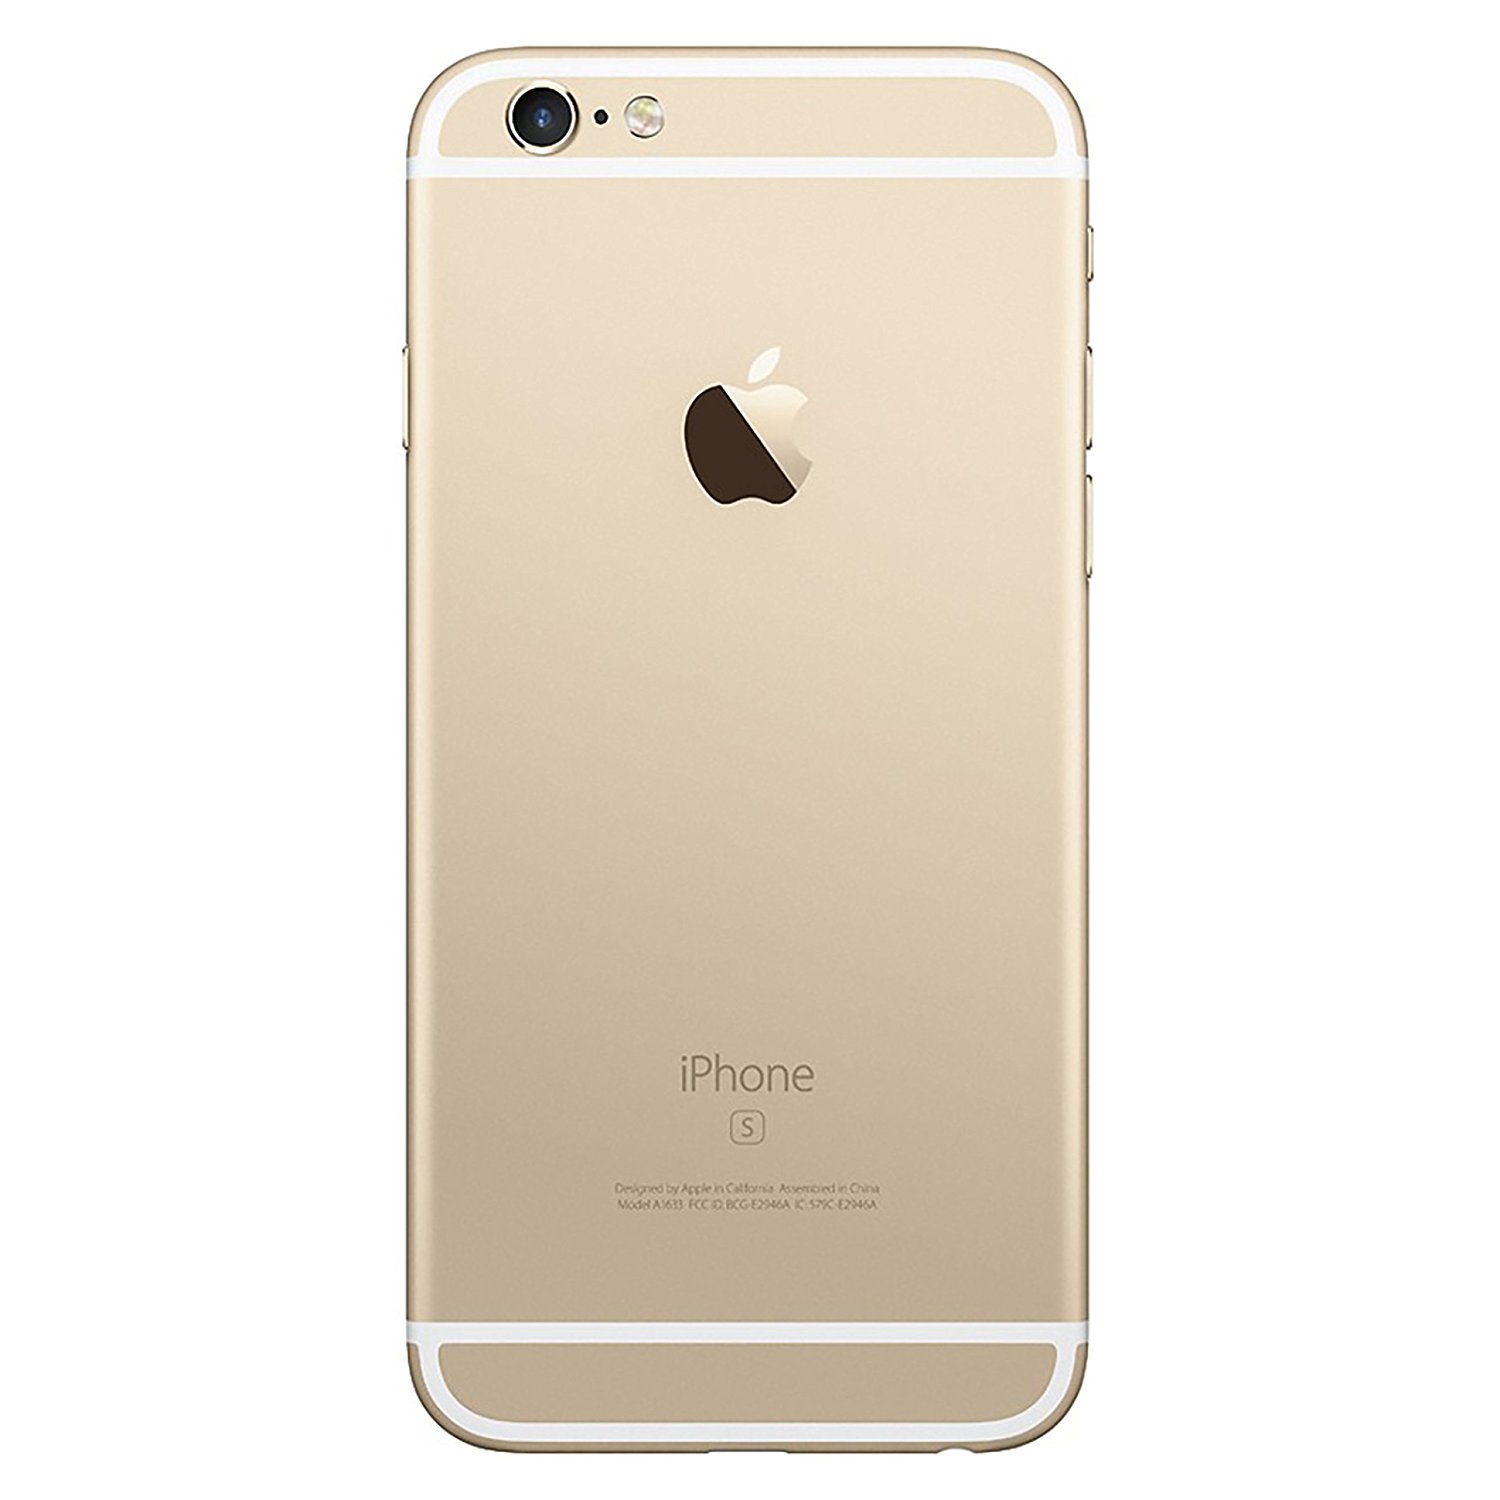 Apple Iphone 6s 64gb A1688 4 7 Inch Gold Factory Unlocked 4g Lte Cell Phone Big Nano Best